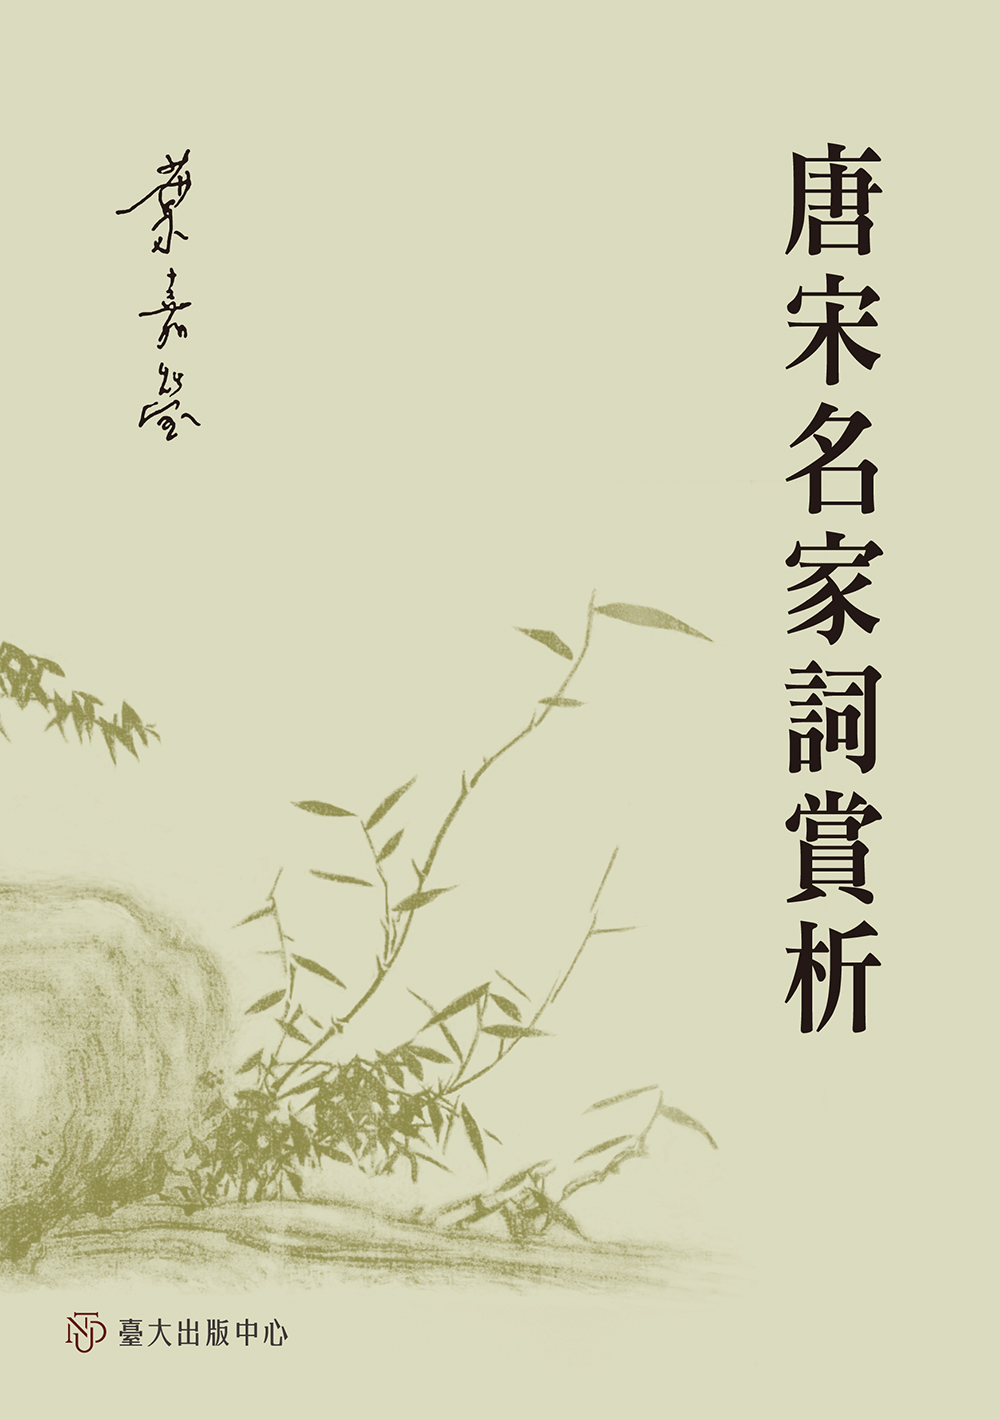 Yeh Chia-ying's Lectures on Famous Ci Poems in the Tang and Song Dynasties